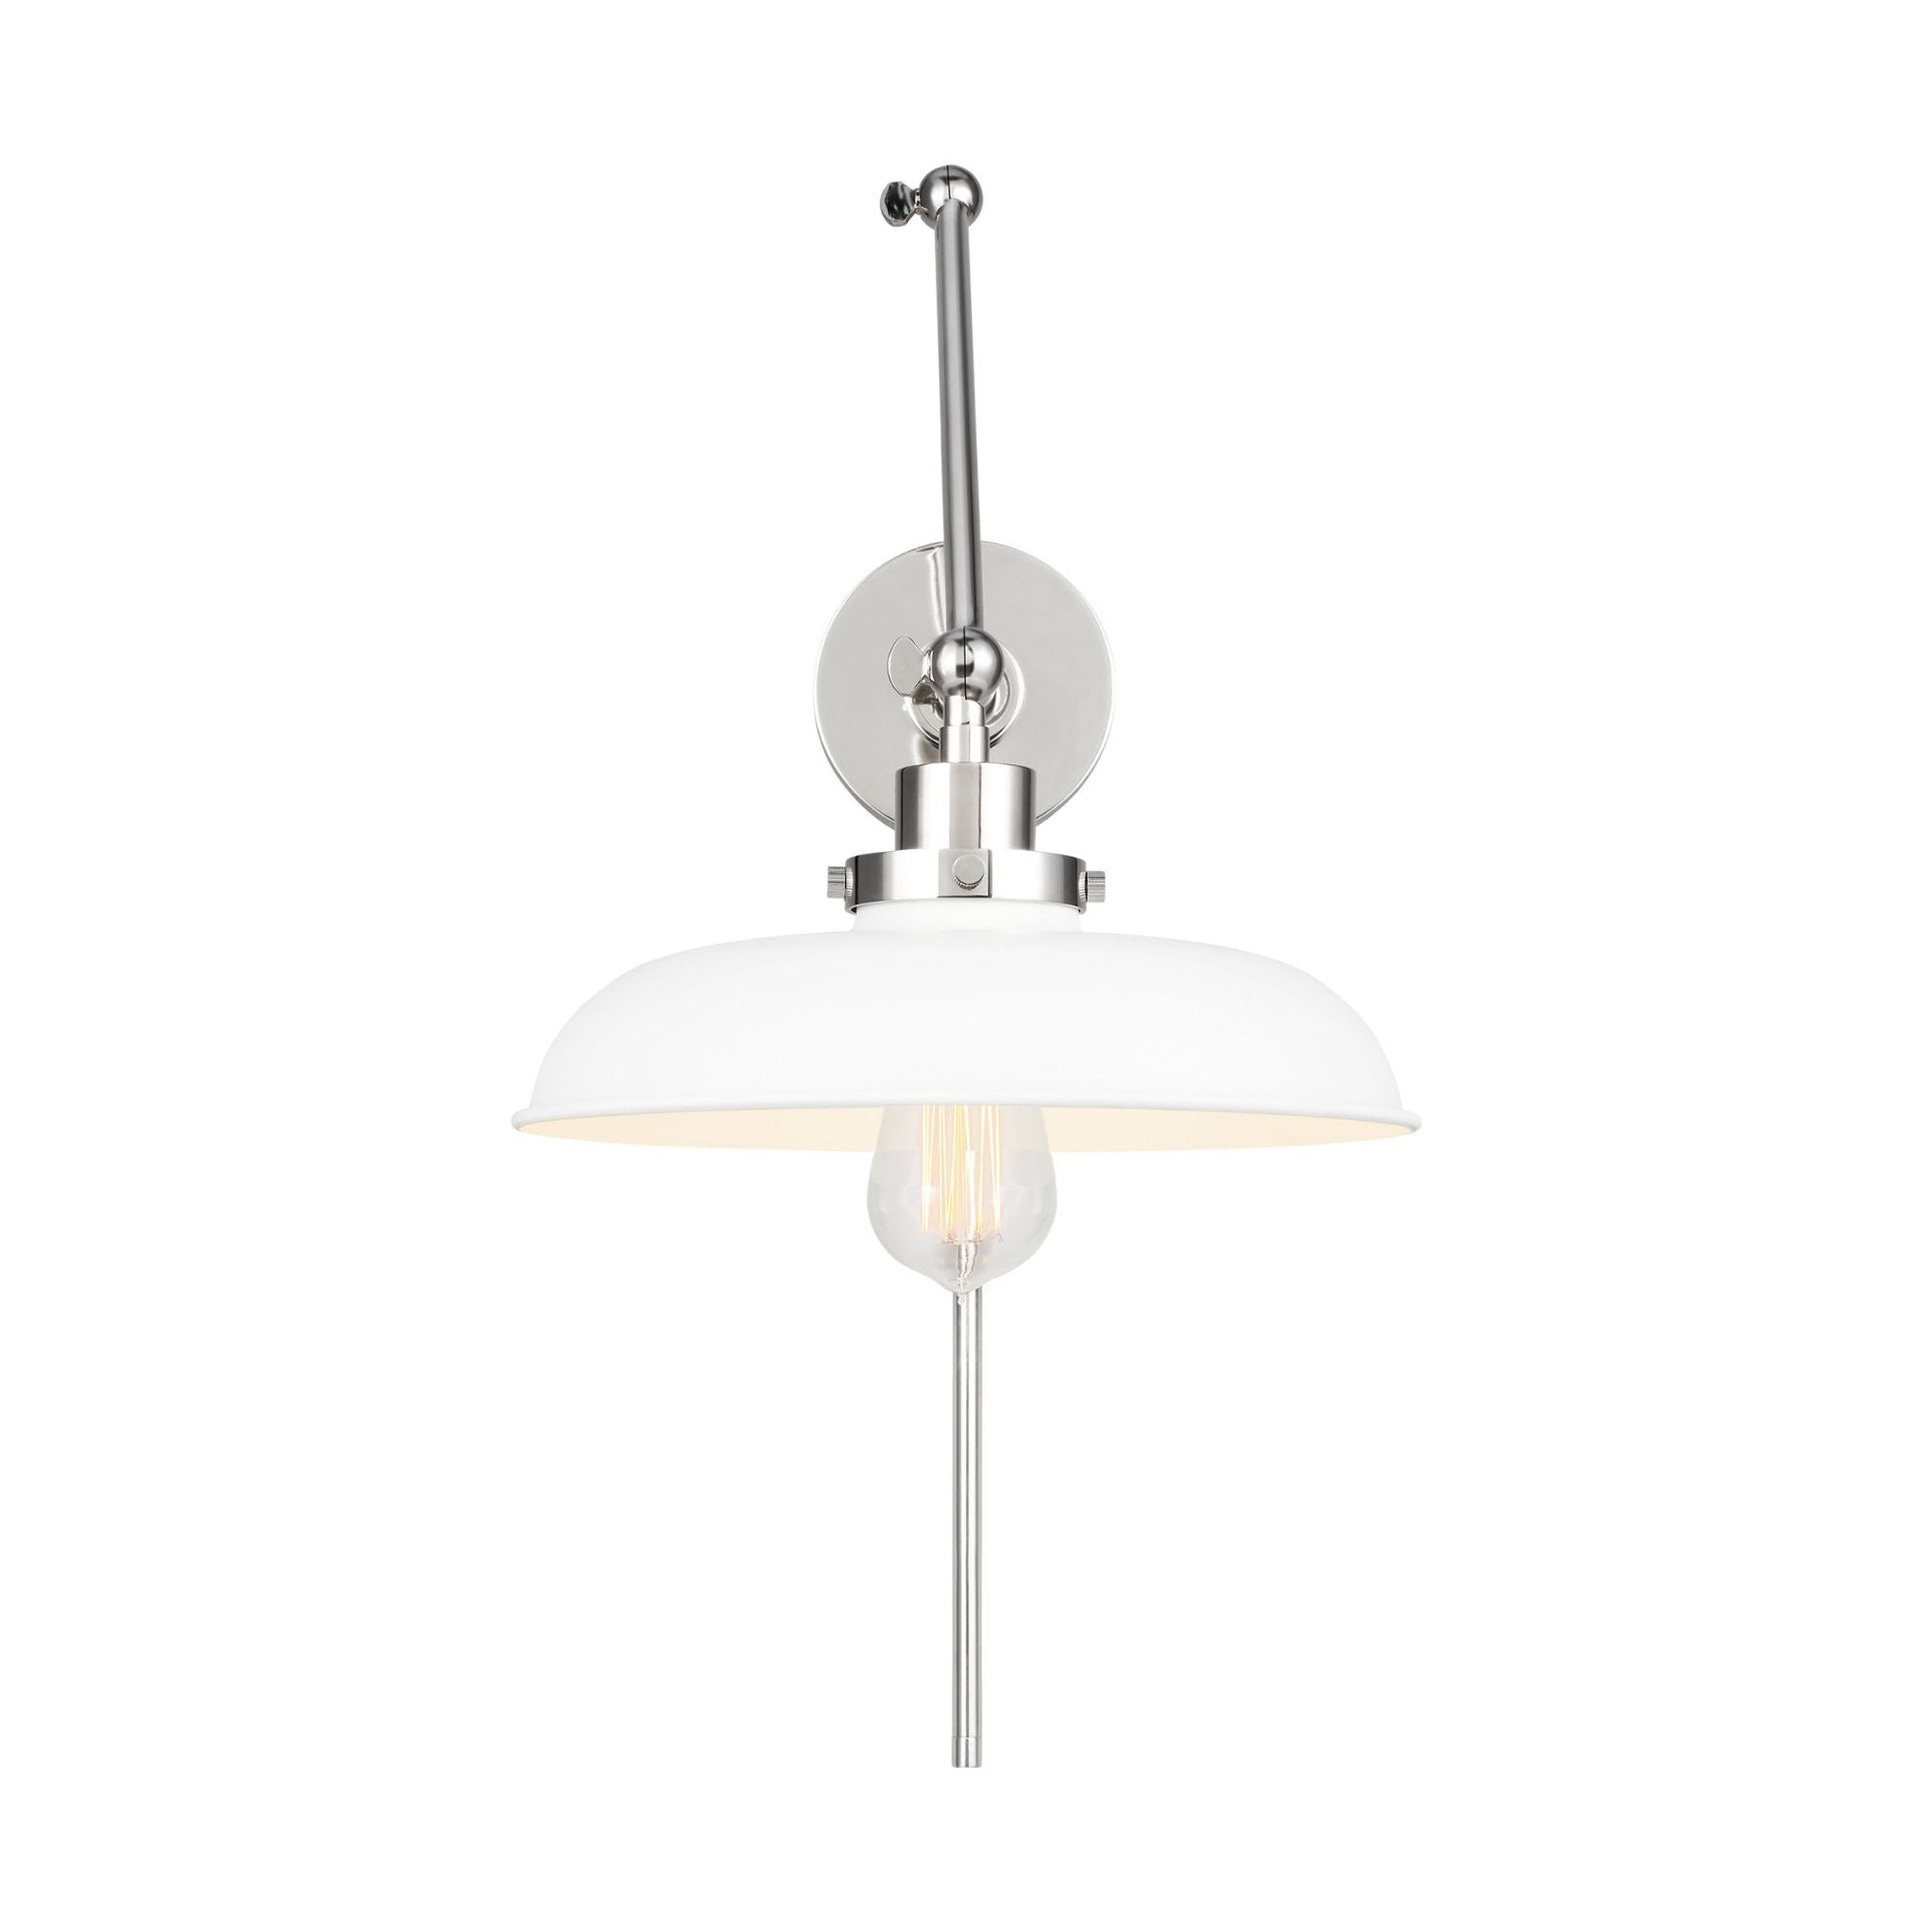 Chapman & Myers Wellfleet Double Arm Wide Task Sconce in Matte White and Polished Nickel